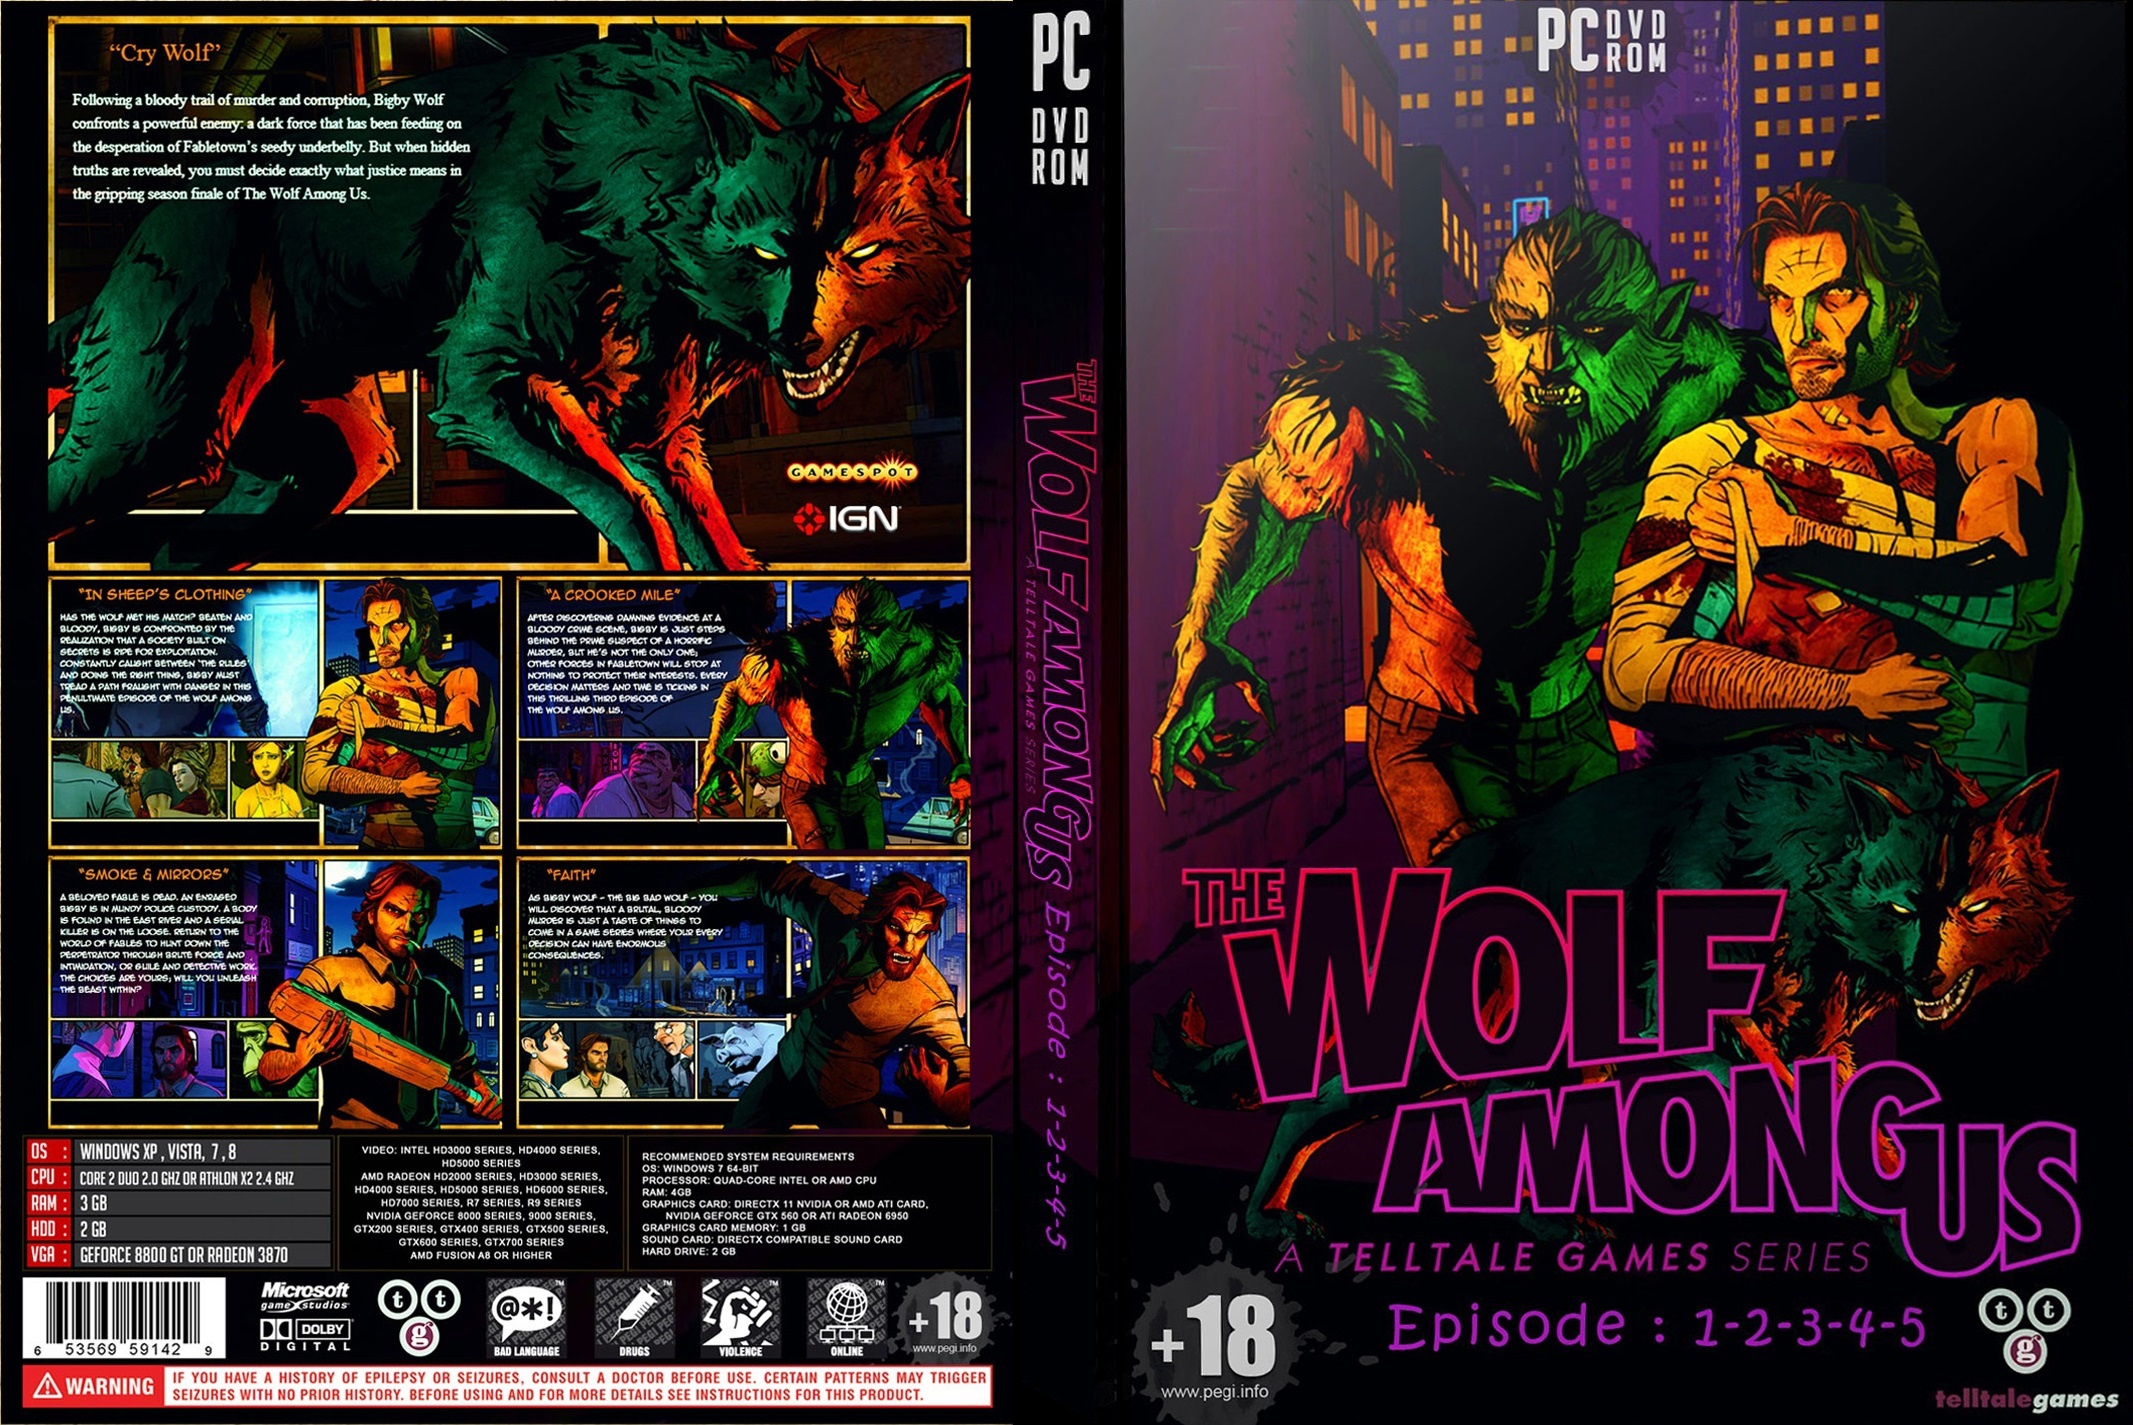 the wolf among us ps3